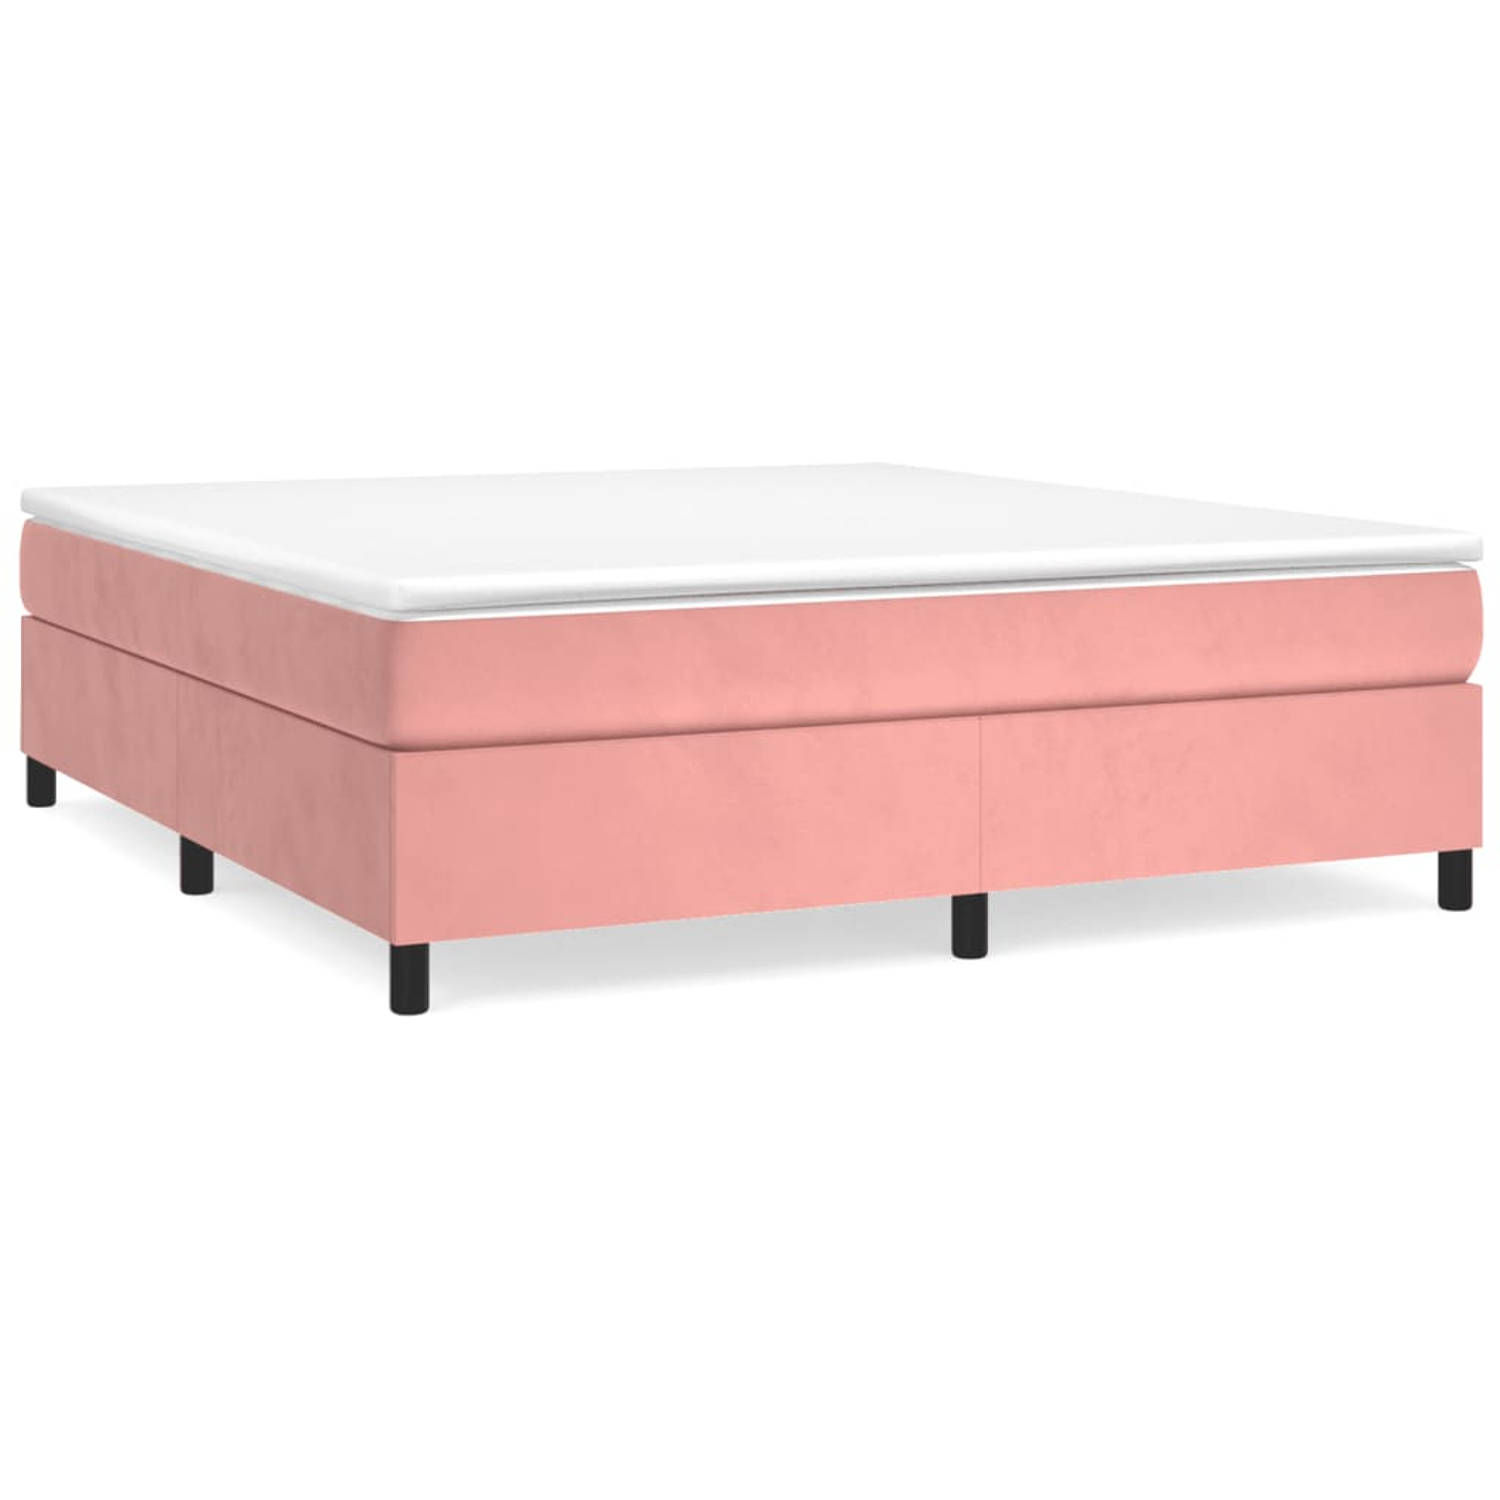 The Living Store Boxspringframe fluweel roze 200x200 cm - Bed